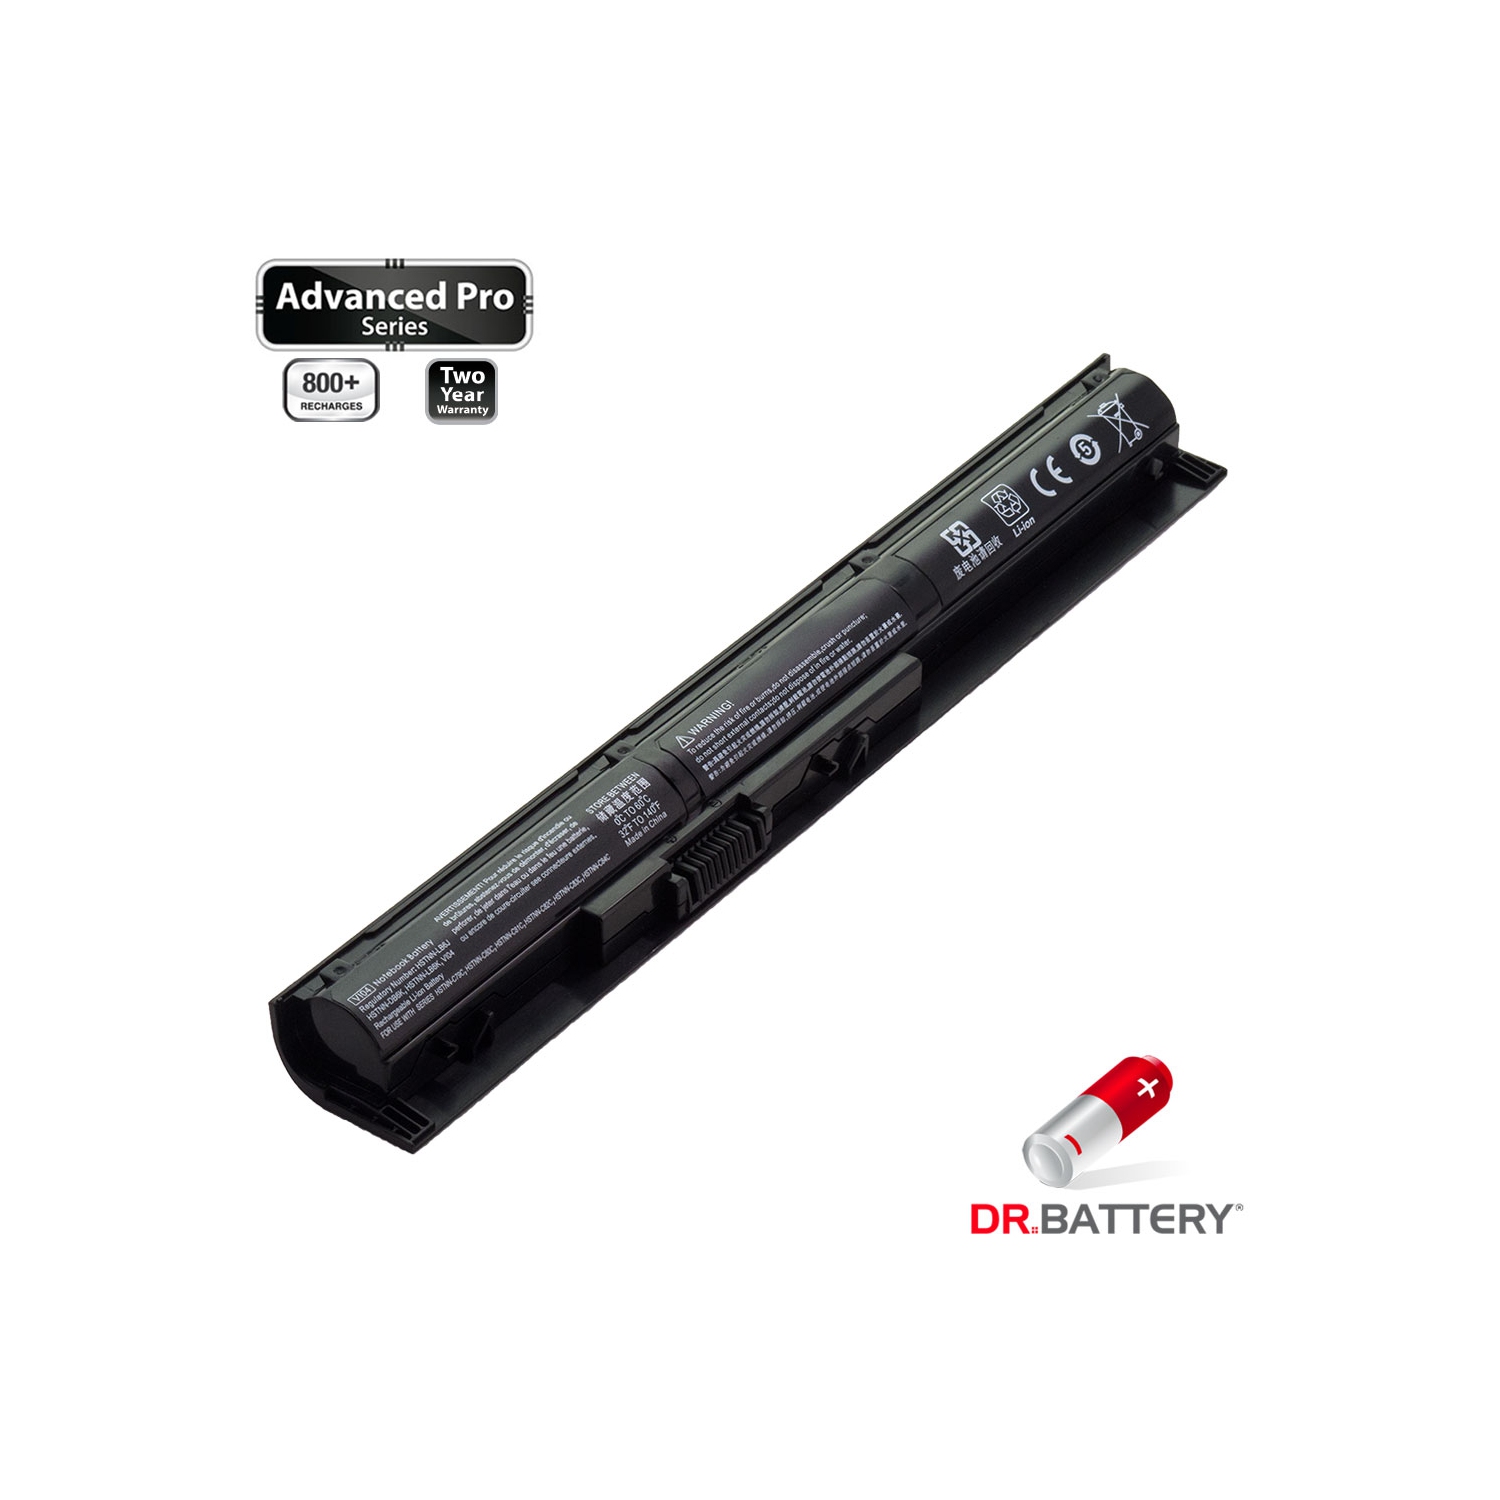 DR. BATTERY - Samsung SDI Cells for HP Pavilion 15-p214dx / 15-p284ca / 17-f084ca / 756744-001 / 756745-001 - Free Shipping